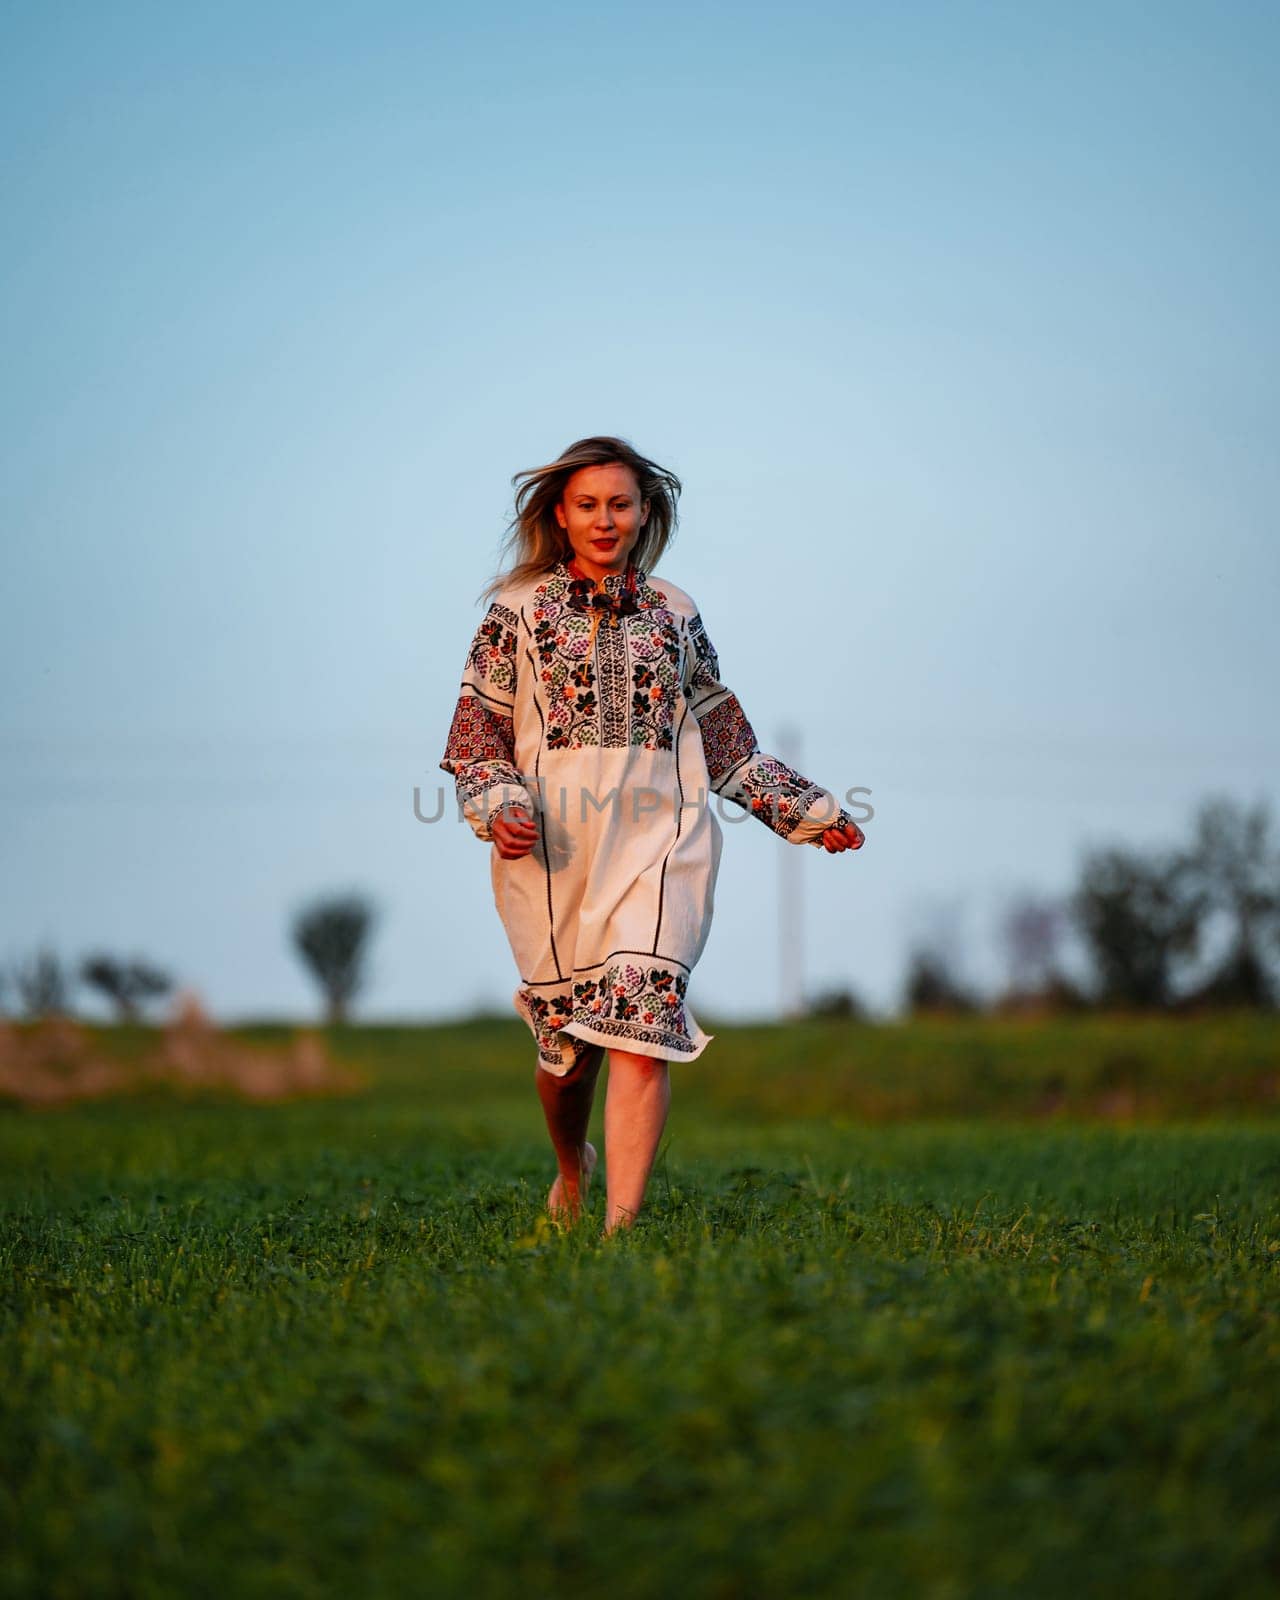 Embroidered and unique petticoat, a girl walks barefoot in the field in an embroidered shirt, Ukrainian clothes and traditions.